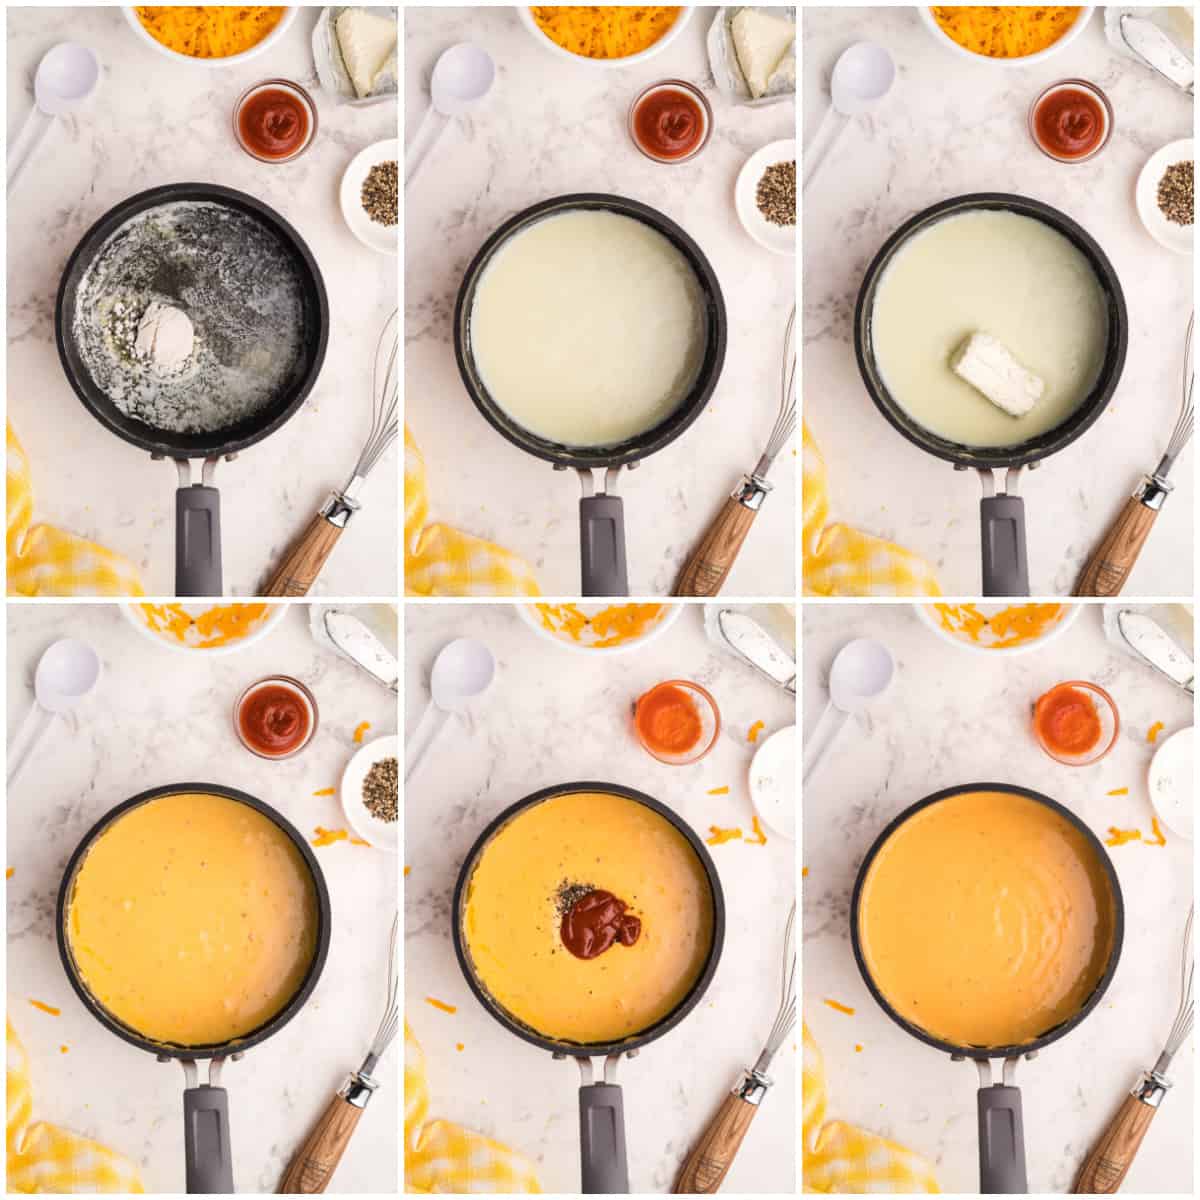 Step by step photos on how to make Nacho Cheese Sauce.